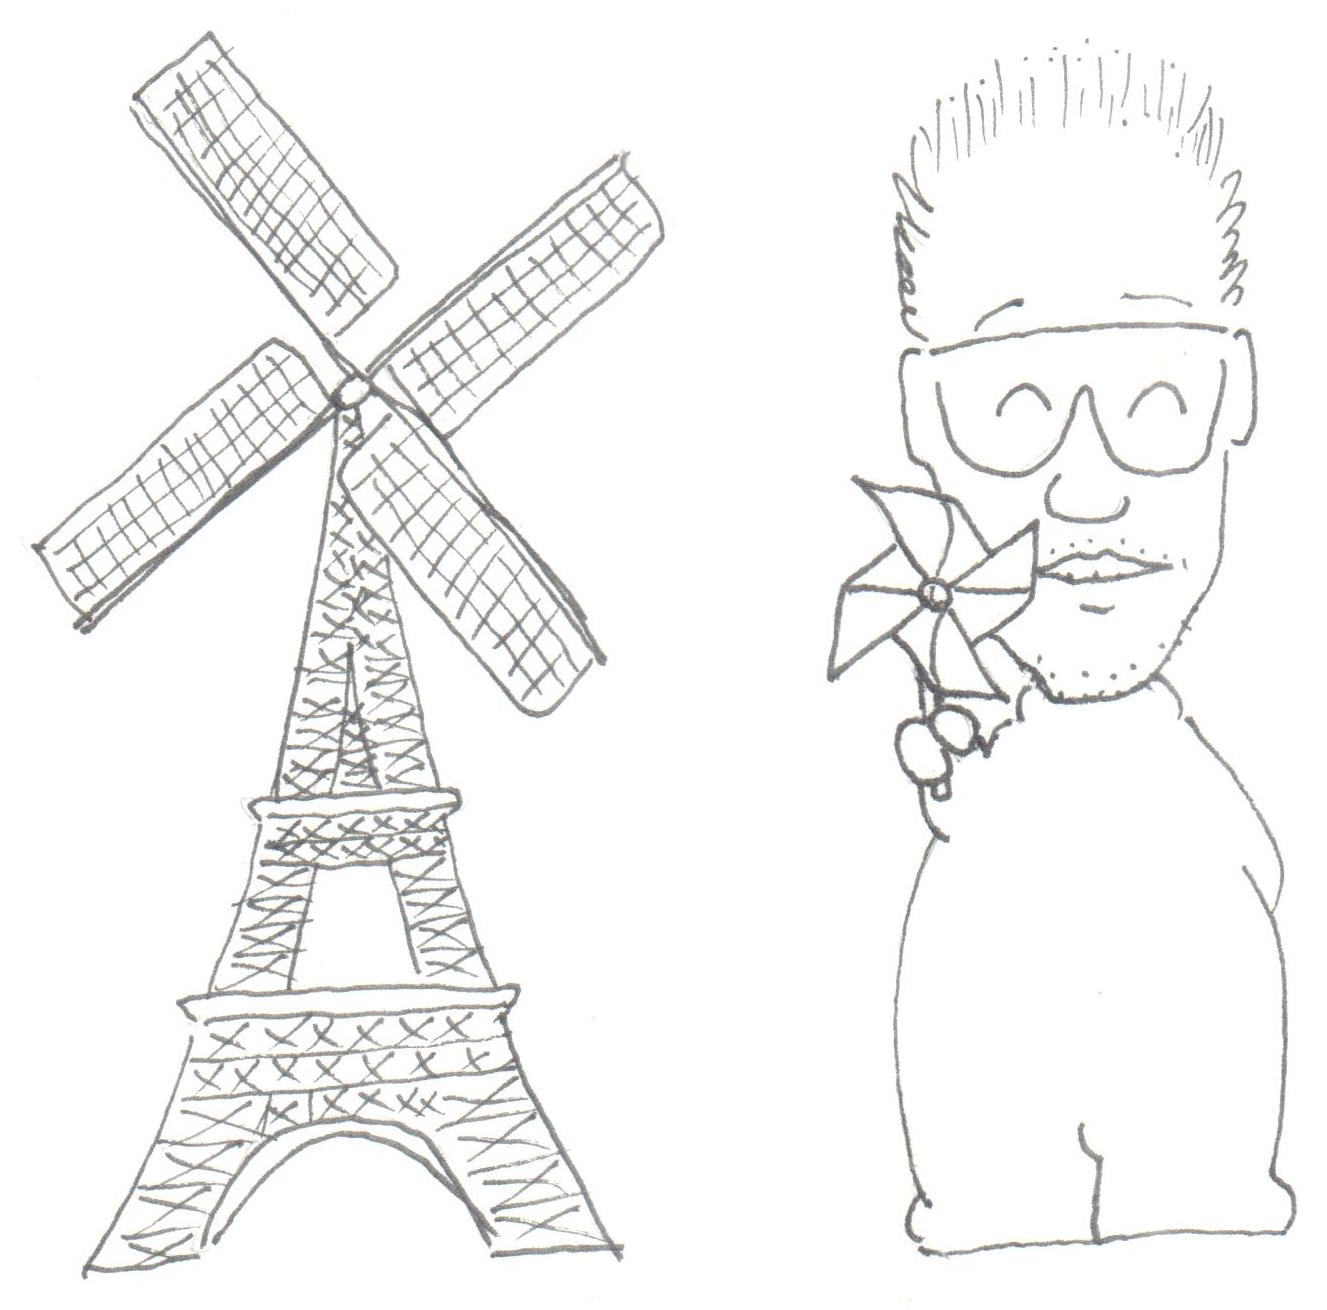 Vaseman holding a windmill with Eiffel Tower